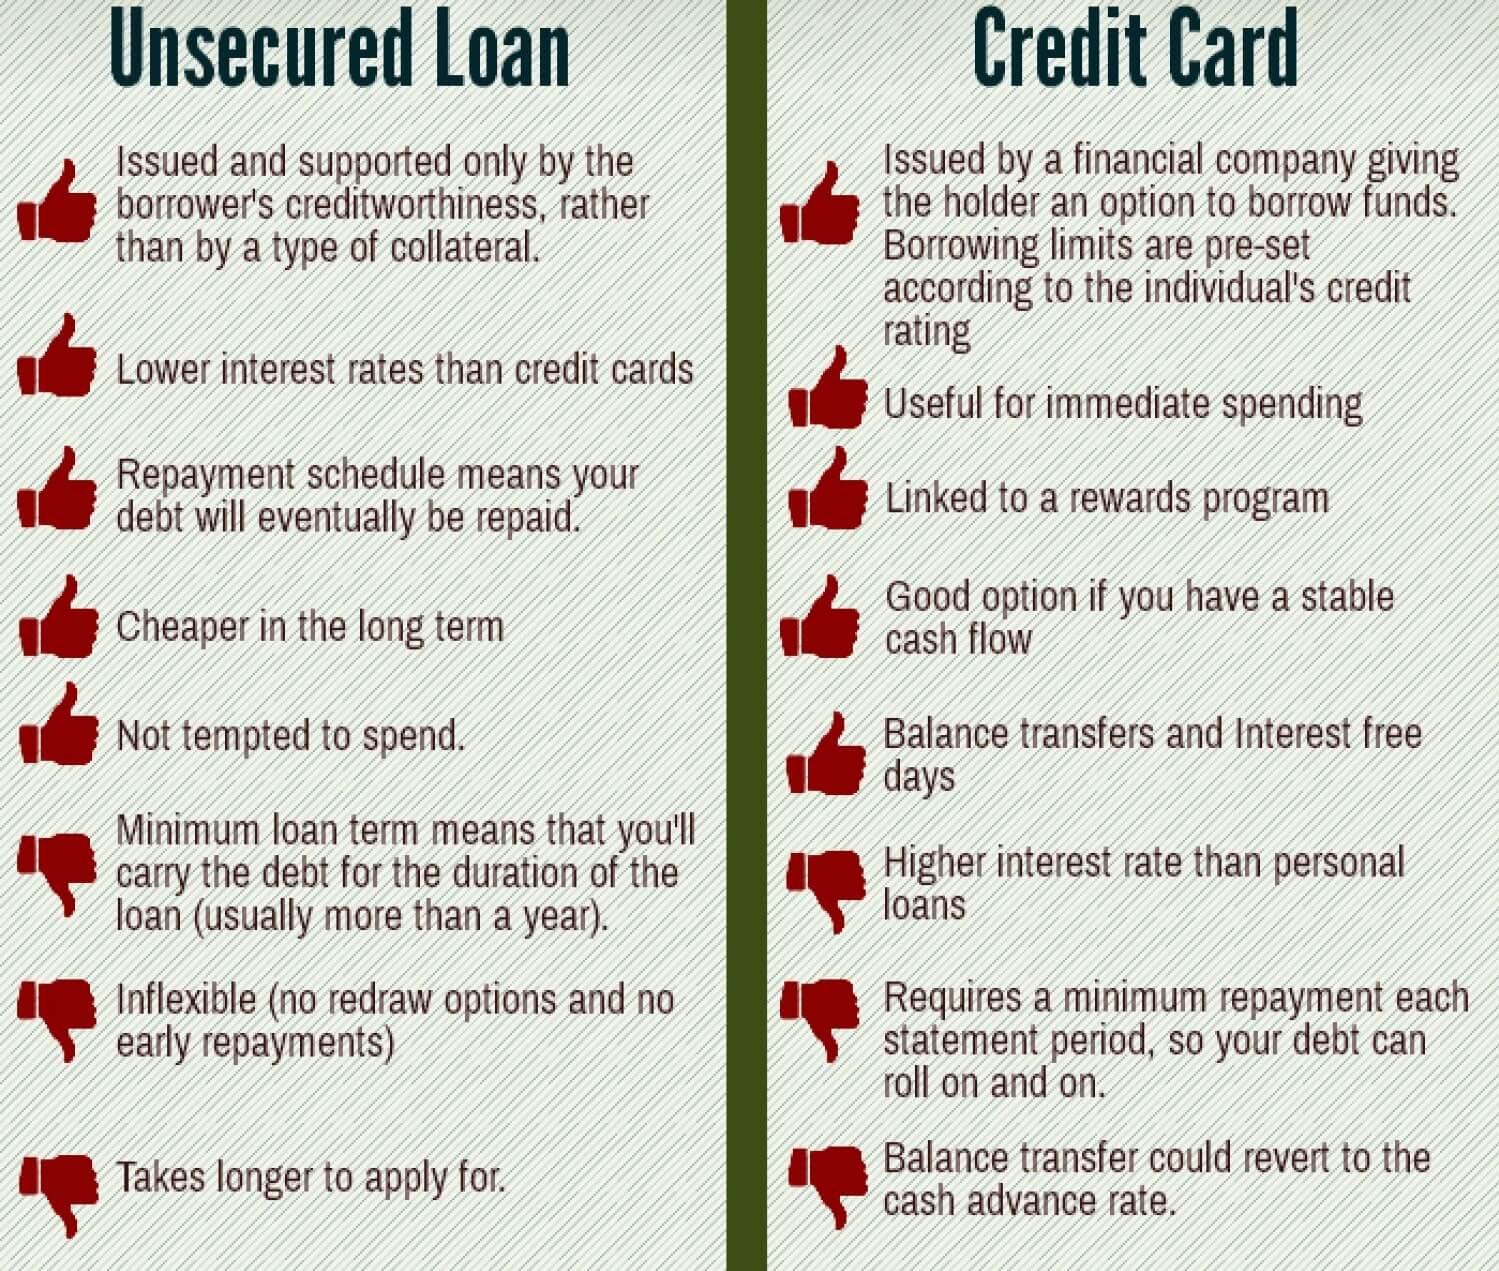 what-is-the-difference-unsecured-loan-vs-credit-card_554317c26ecf5_w1500.png